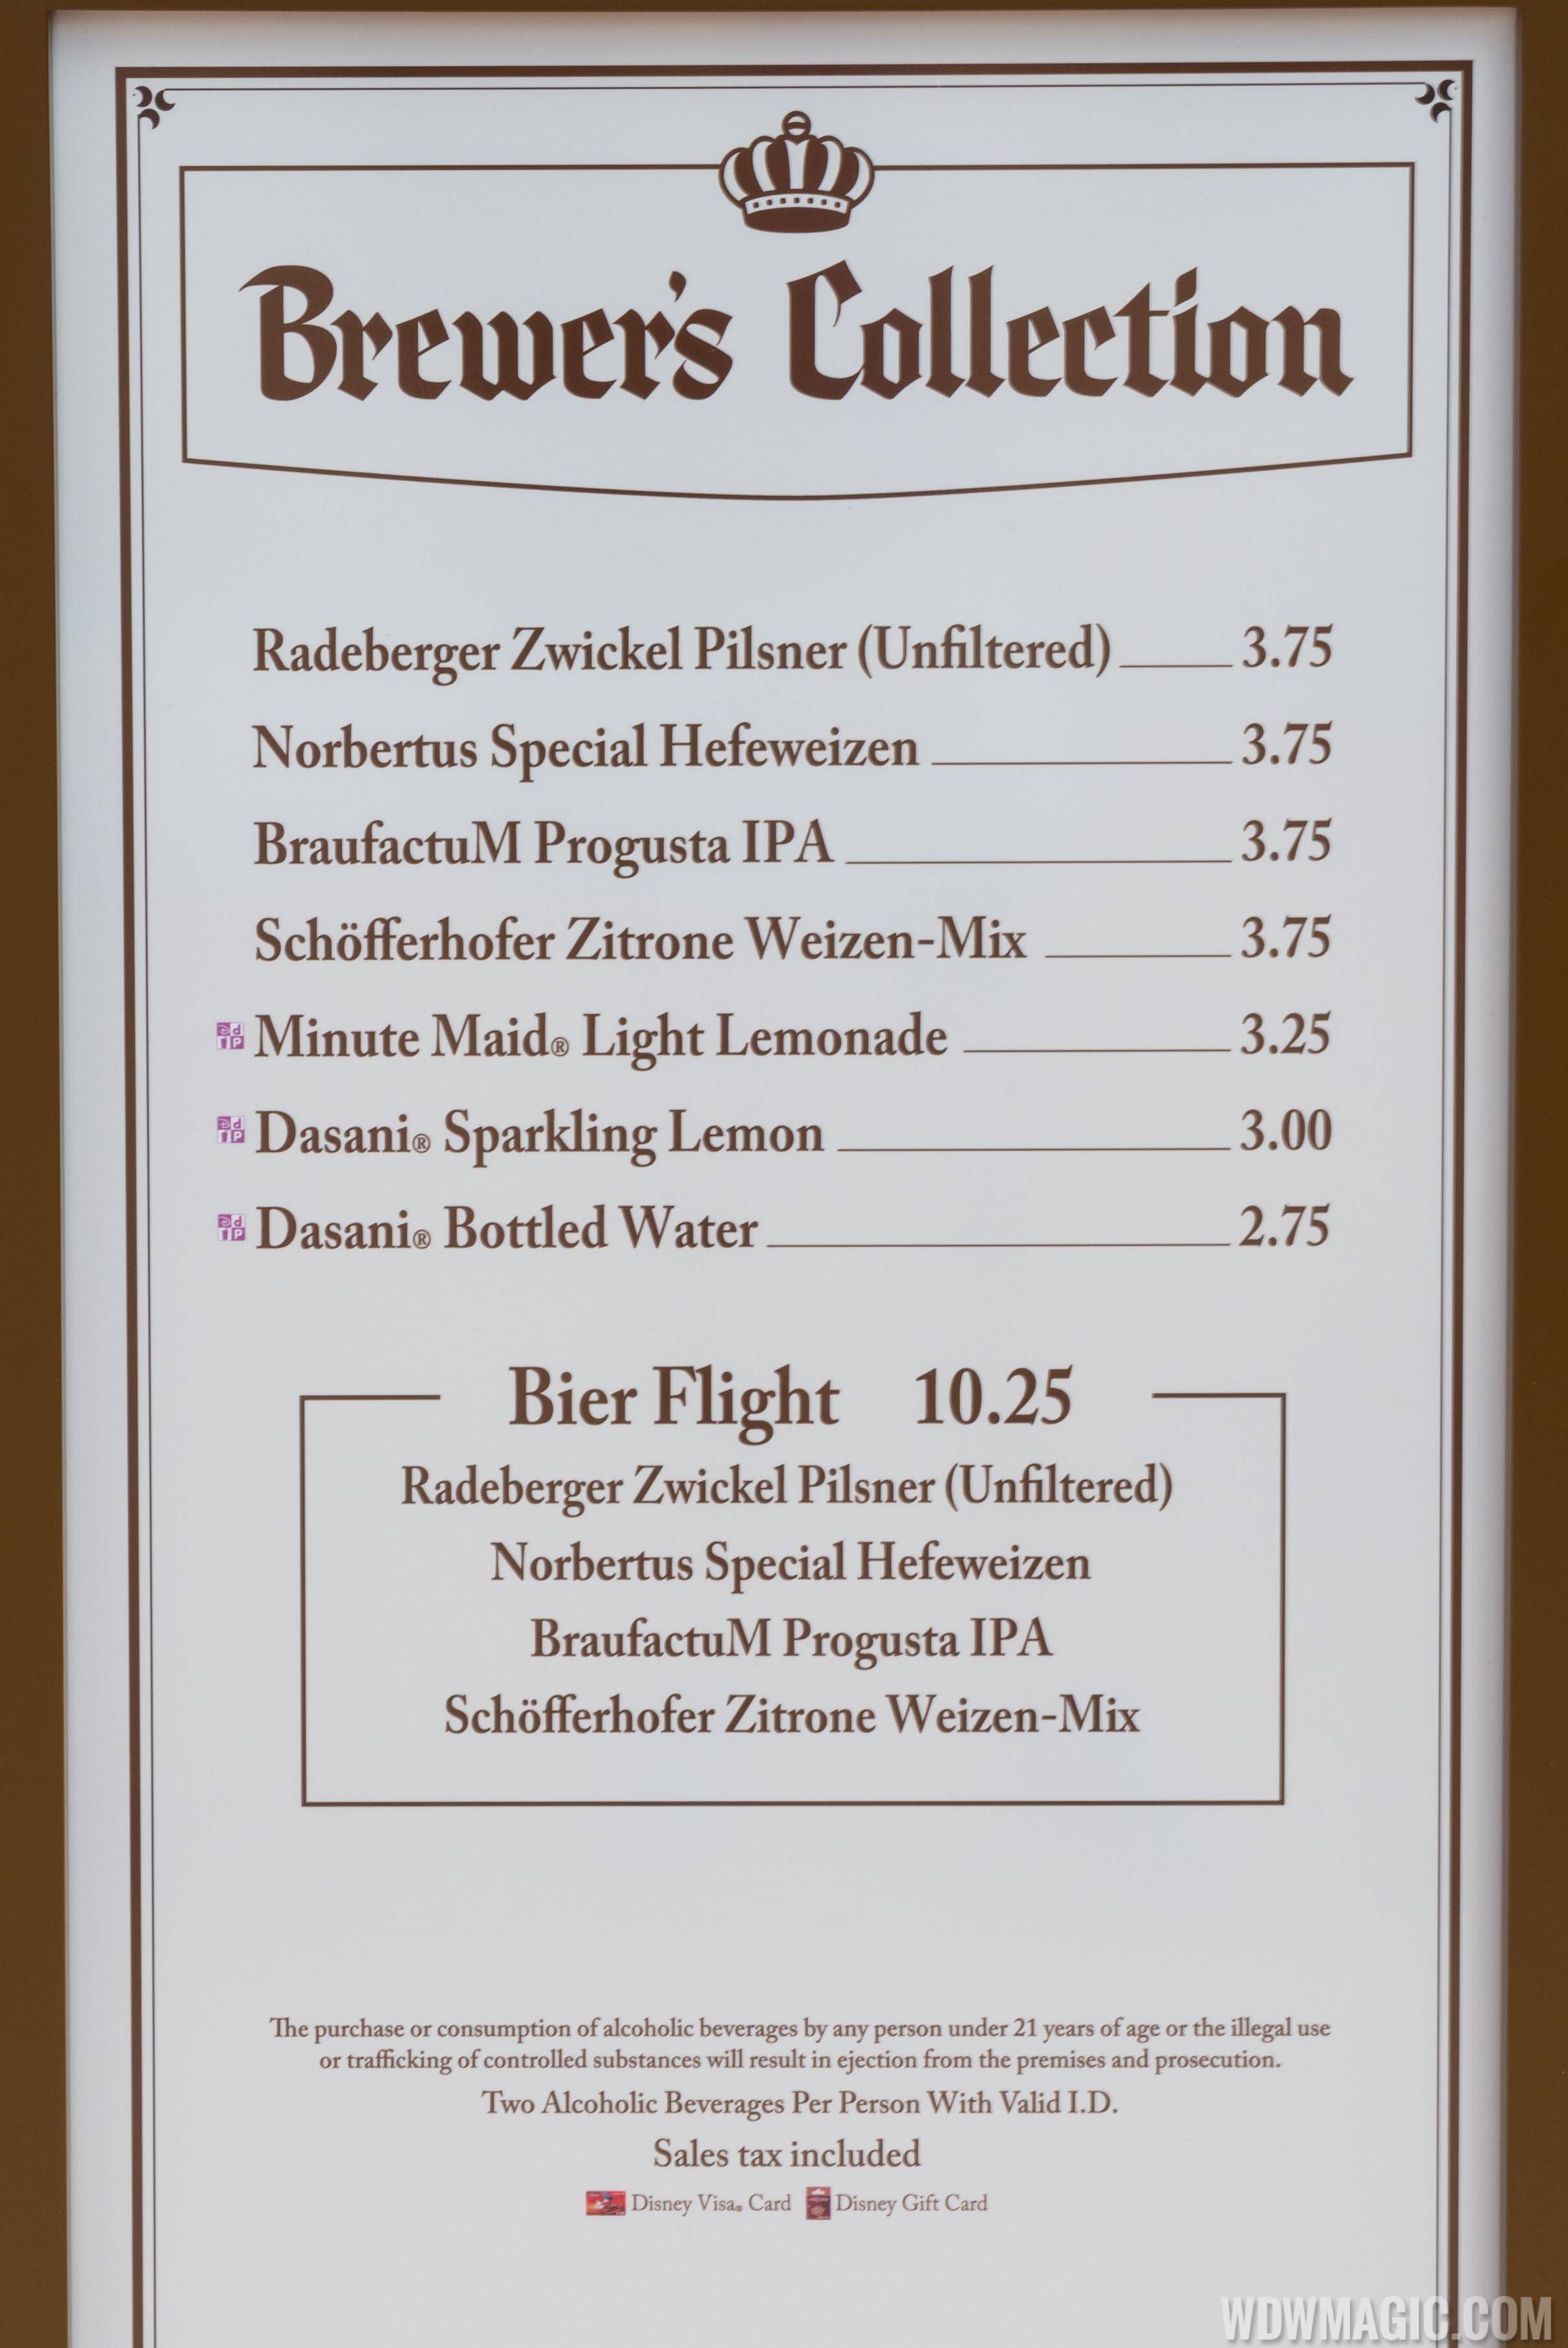 2015 Epcot Food and Wine Festival Marketplace kiosk - Brewer's Collection menu